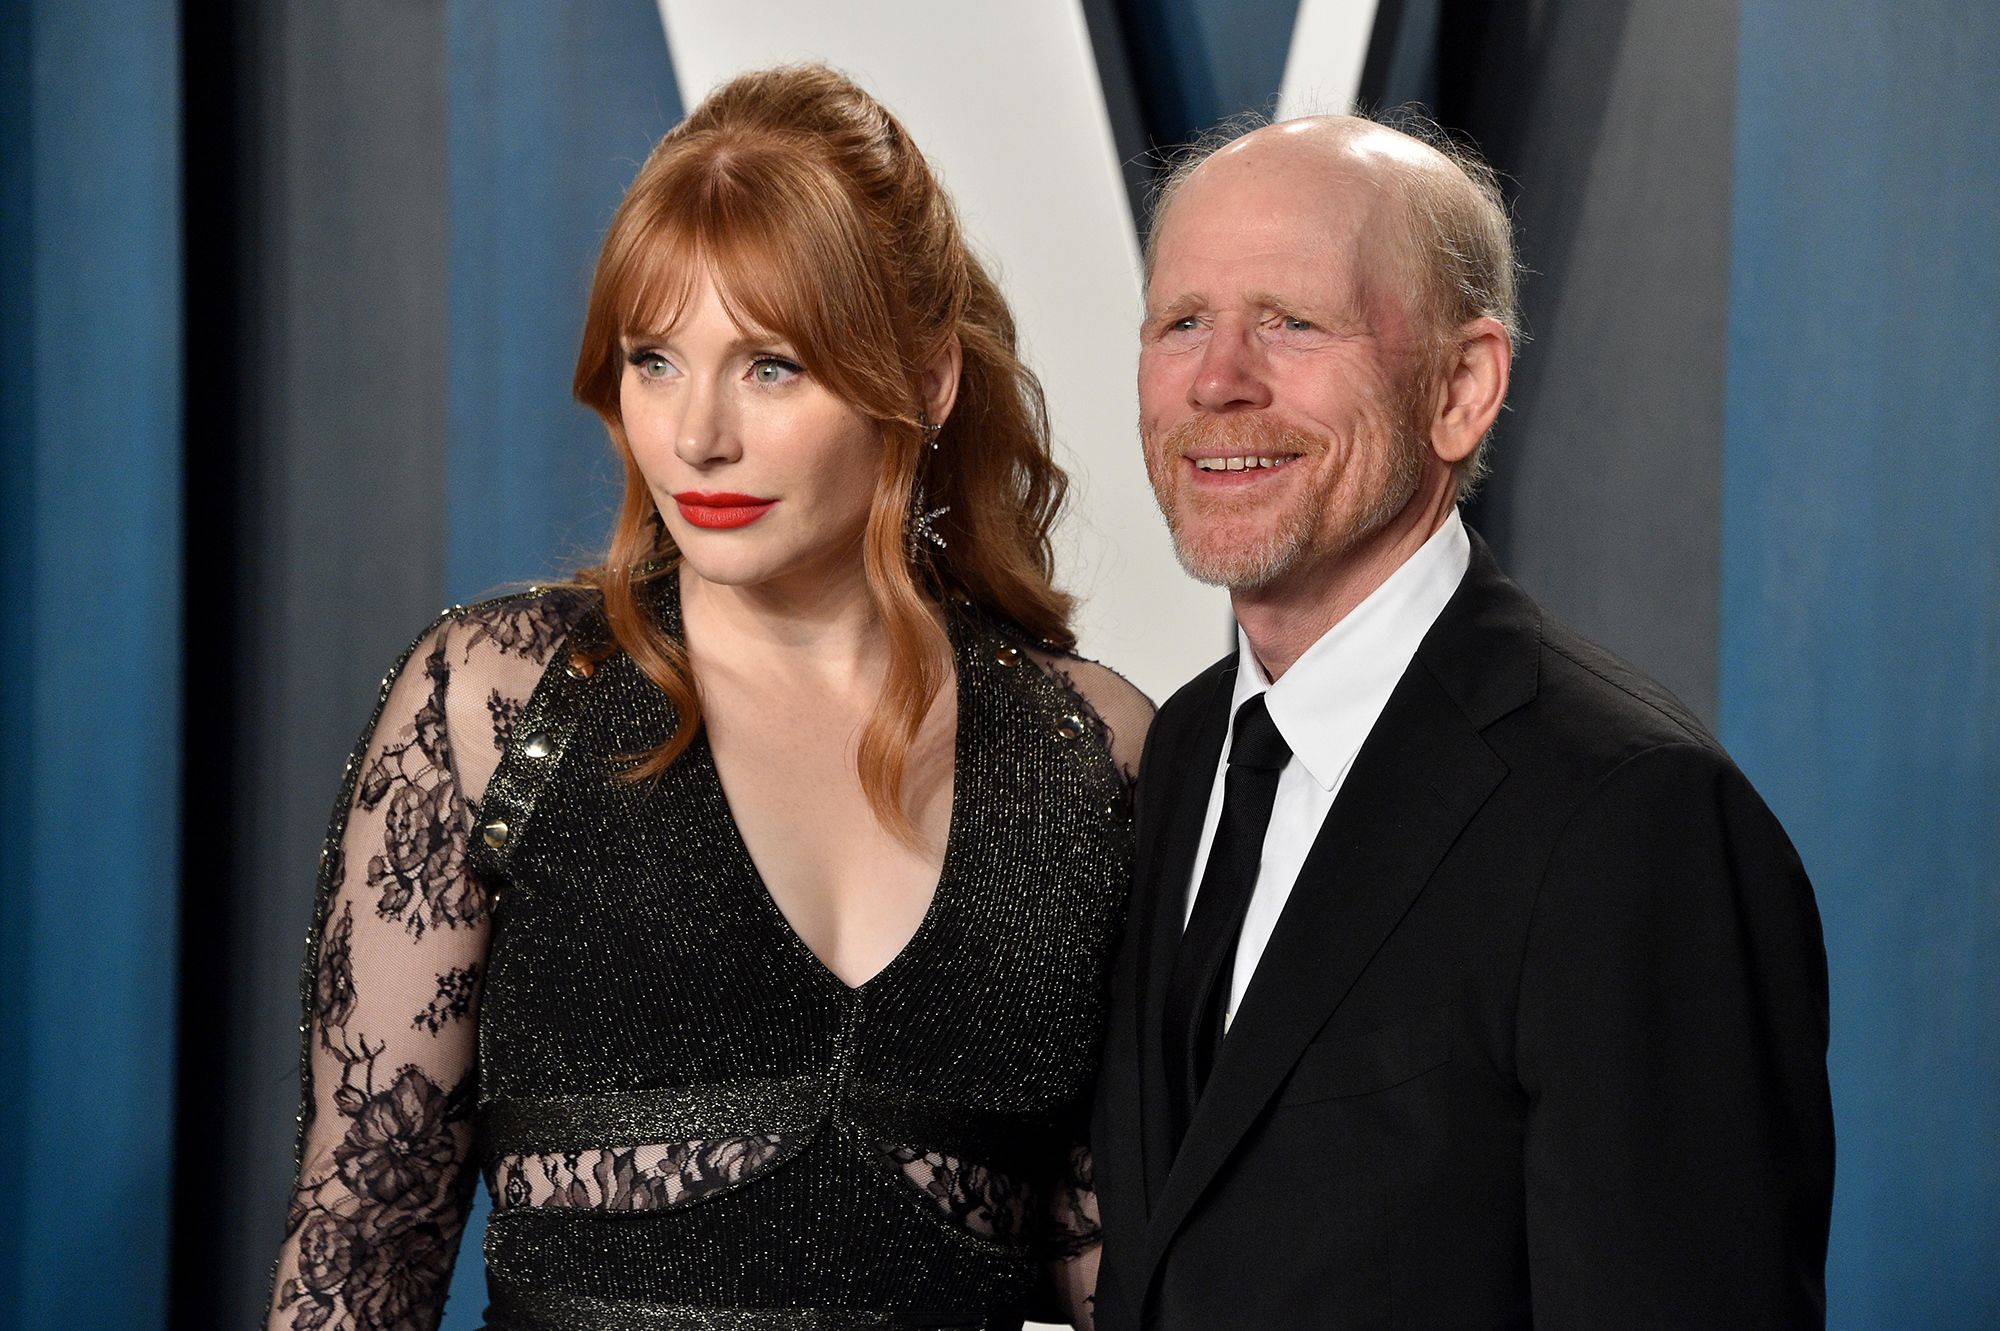 Bryce Dallas Howard said her dad Ron Howard wouldn’t let her act as a child - Entertainment - News